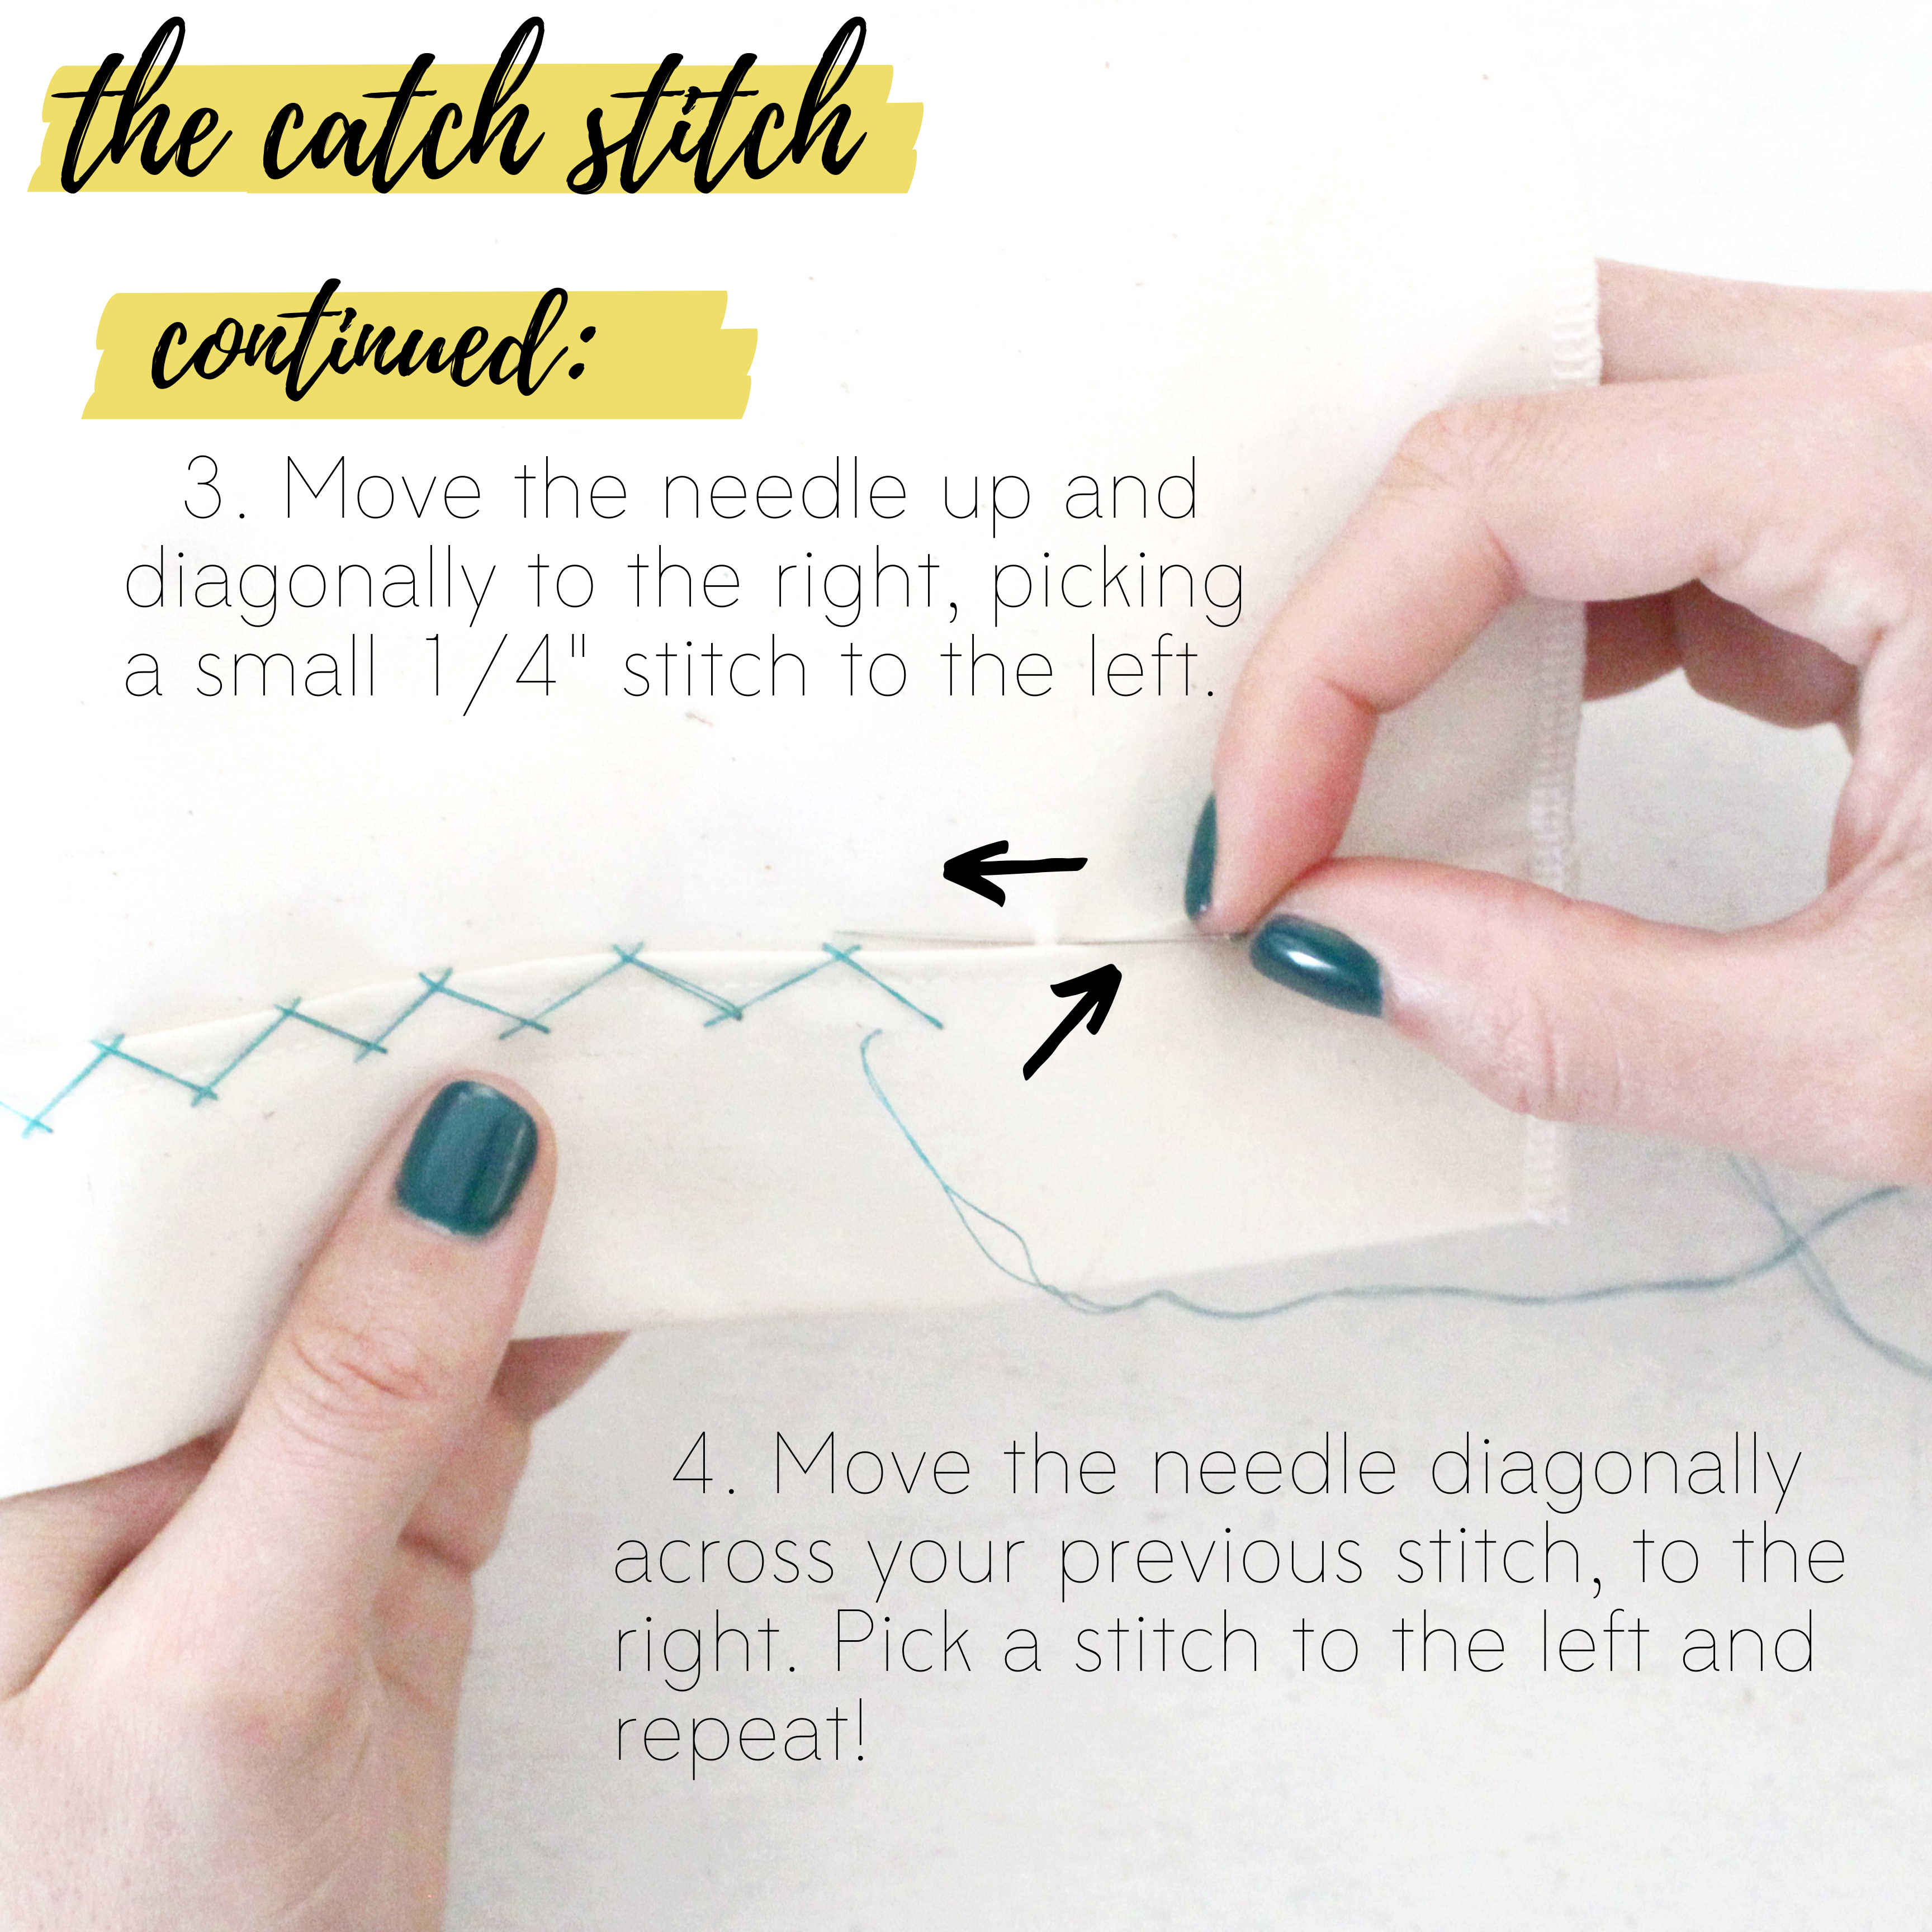 How To Sew Different Types Of Hand Stitches: The Catch Stitch